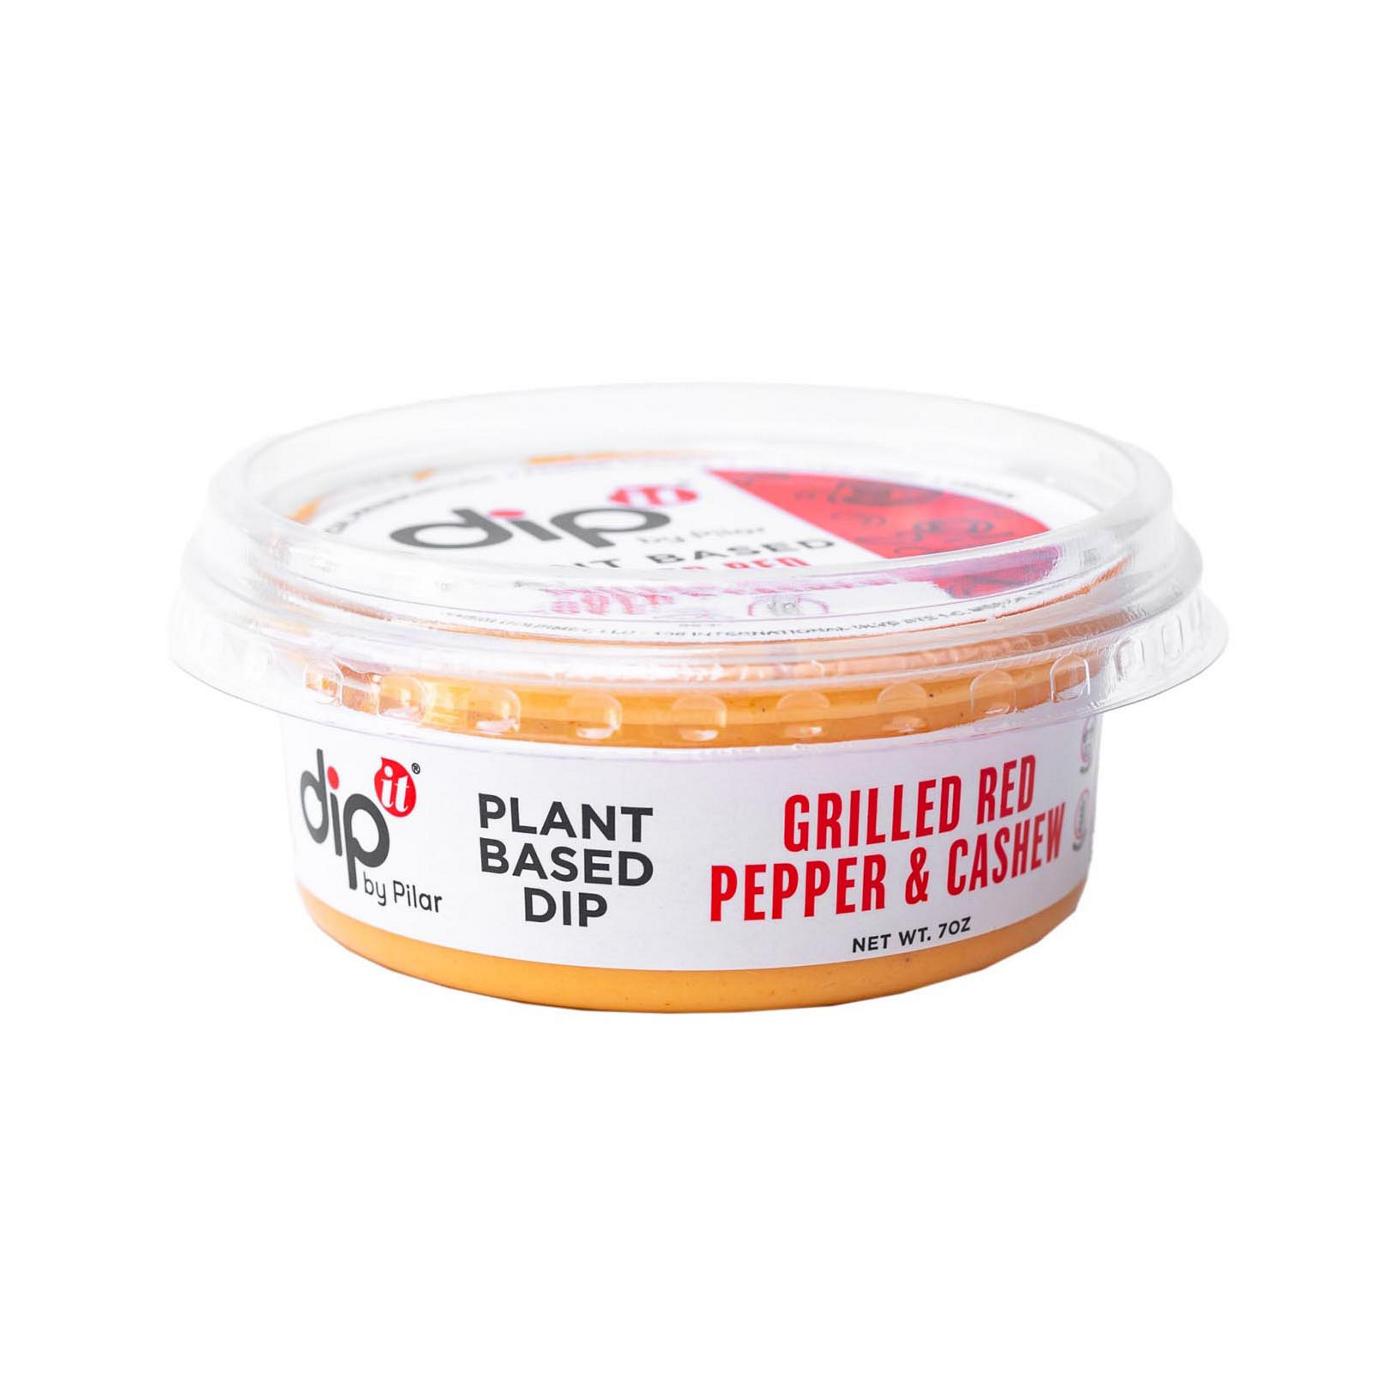 Dip It Plant-Based Grilled Red Pepper & Cashew Dip; image 2 of 2